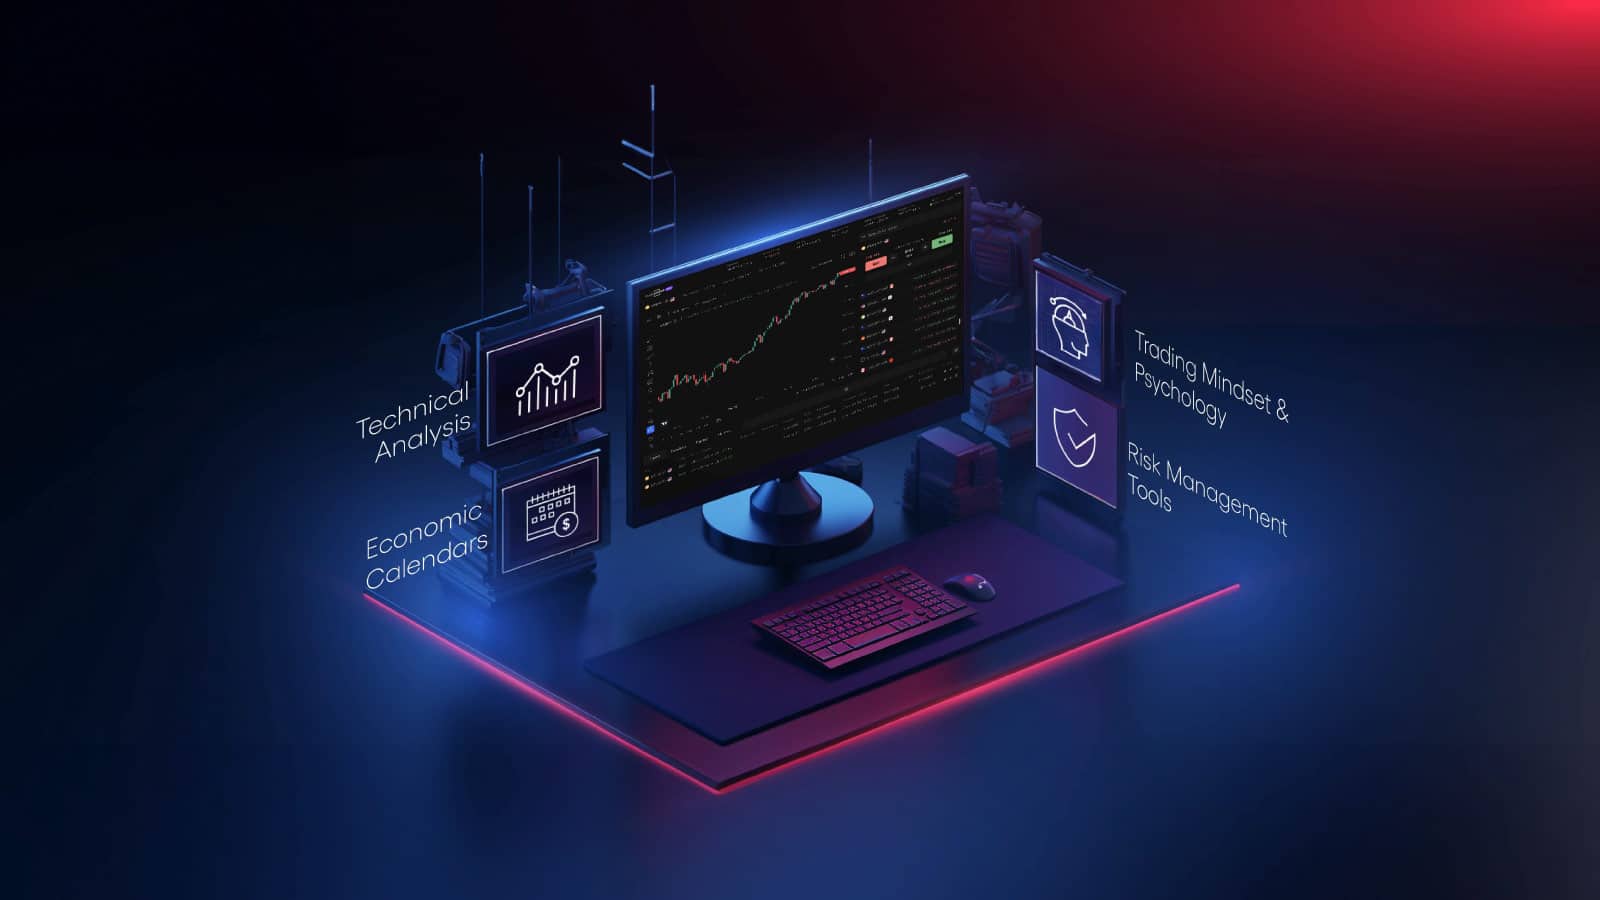 Futuristic trader's computer screen with must-have trading tools like economic calendars, risk management tools, and technical analysis resources